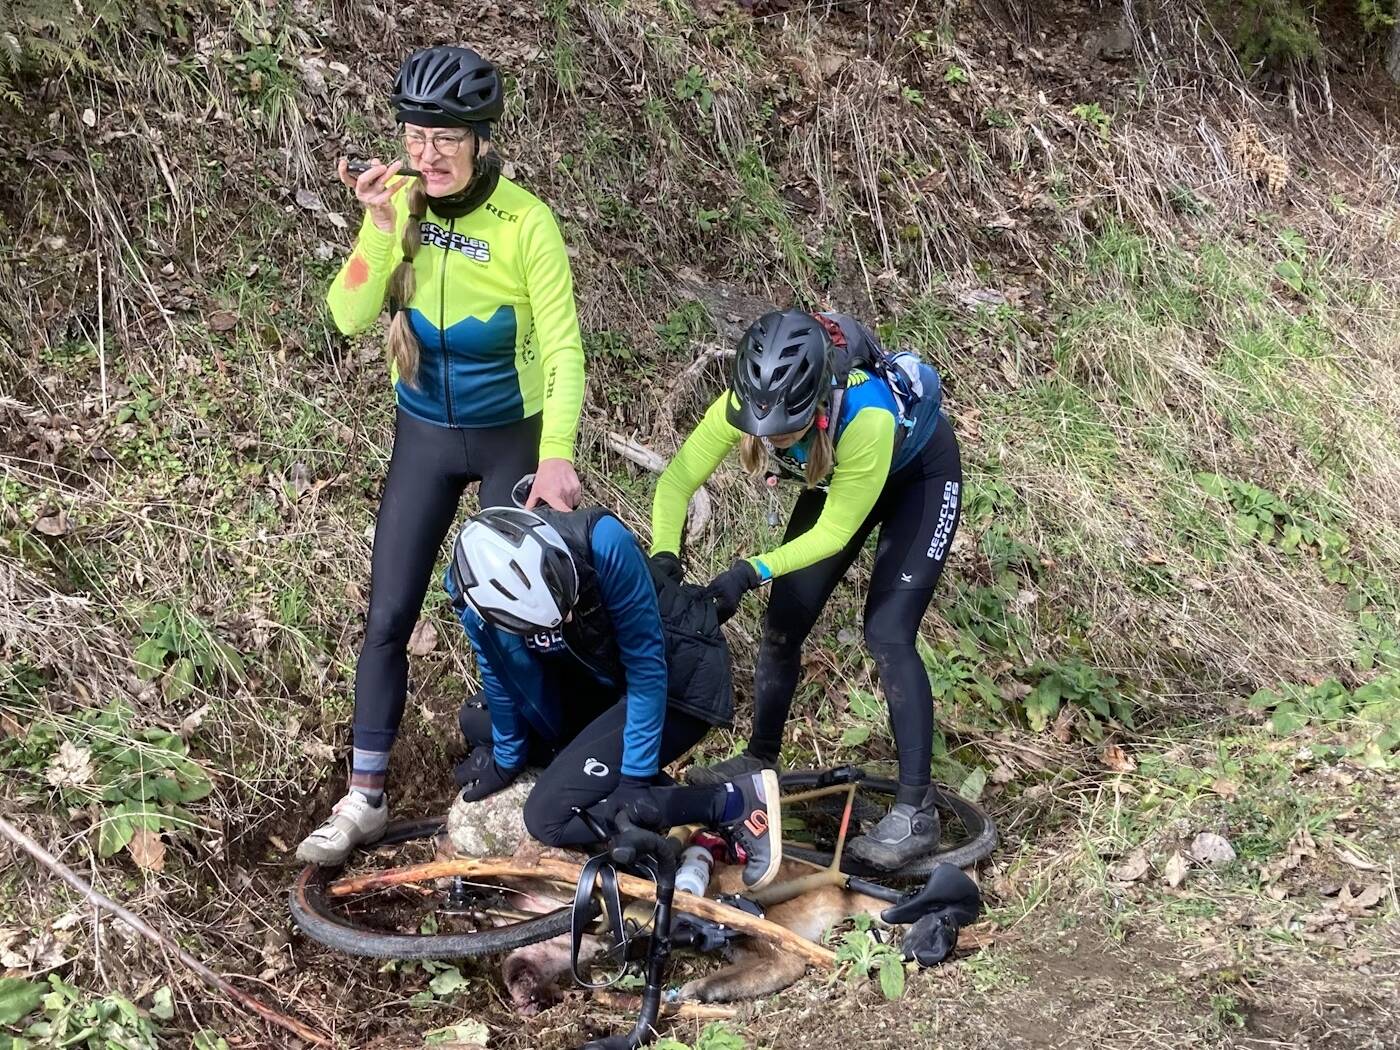 Keri Bergere’s cycling team was able to pin the 75-pound cougar under one of their bikes as they called 911 and waited for Fish and Wildlife to arrive. (Photo courtesy of Keri Bergere)